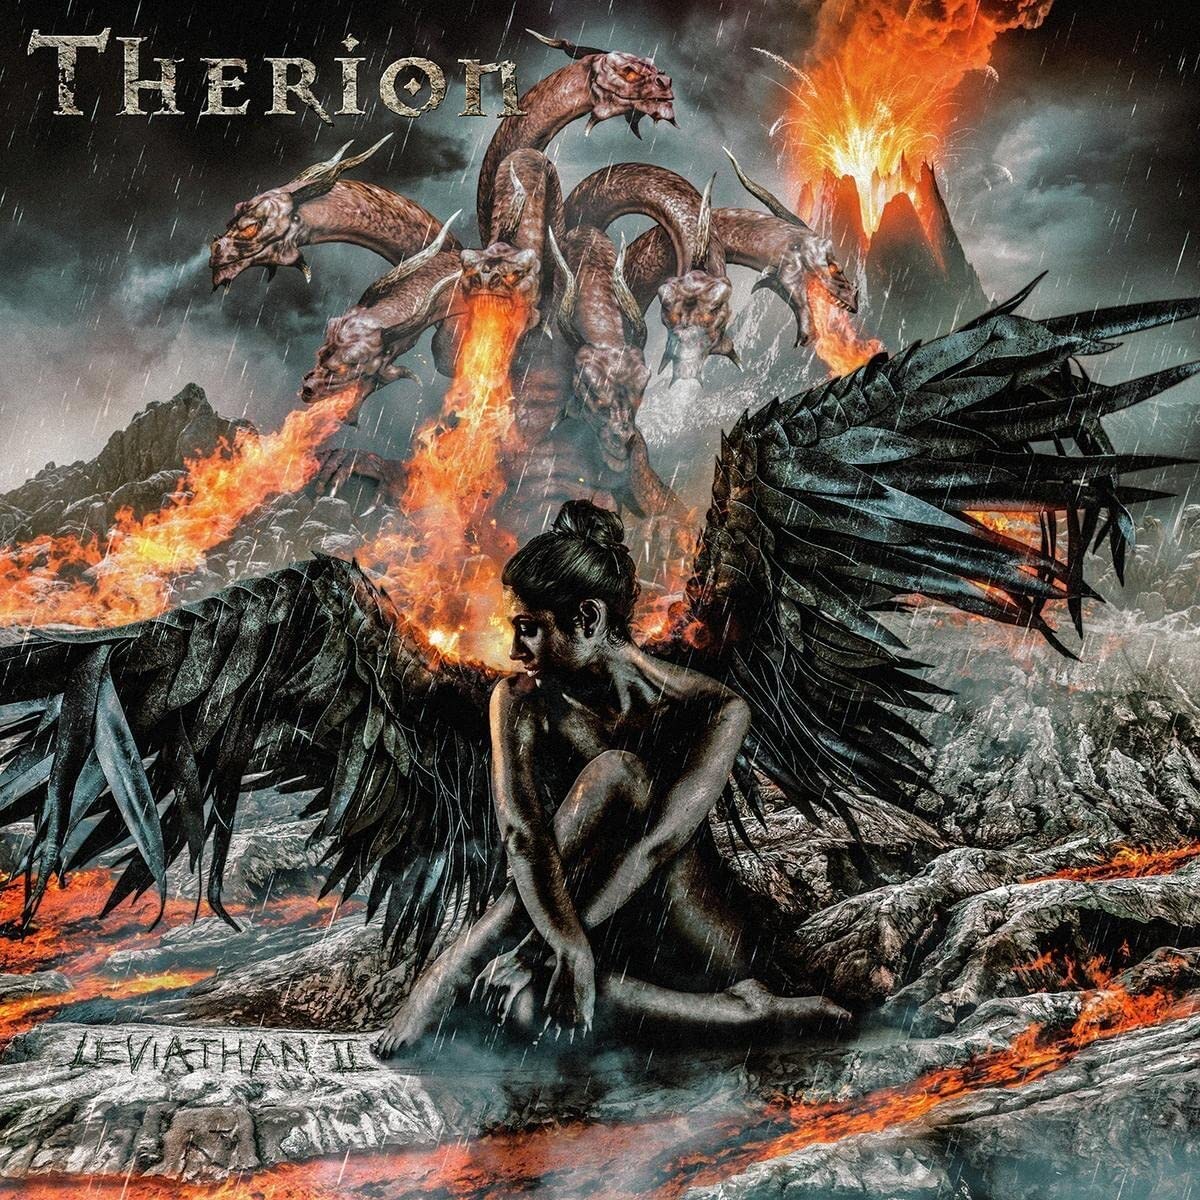 Therion - Leviathan II - LP